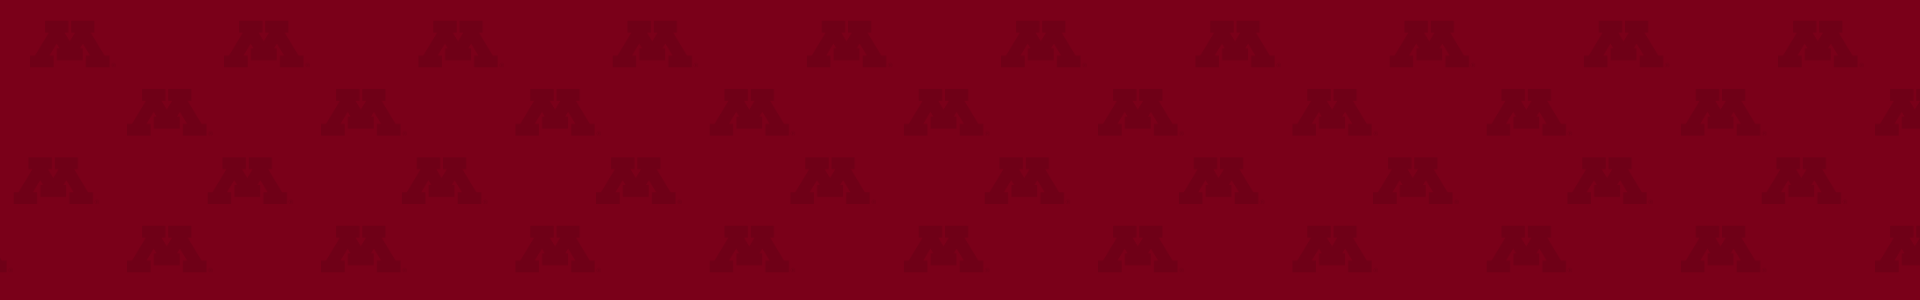 Block M logos with maroon background (decorative)